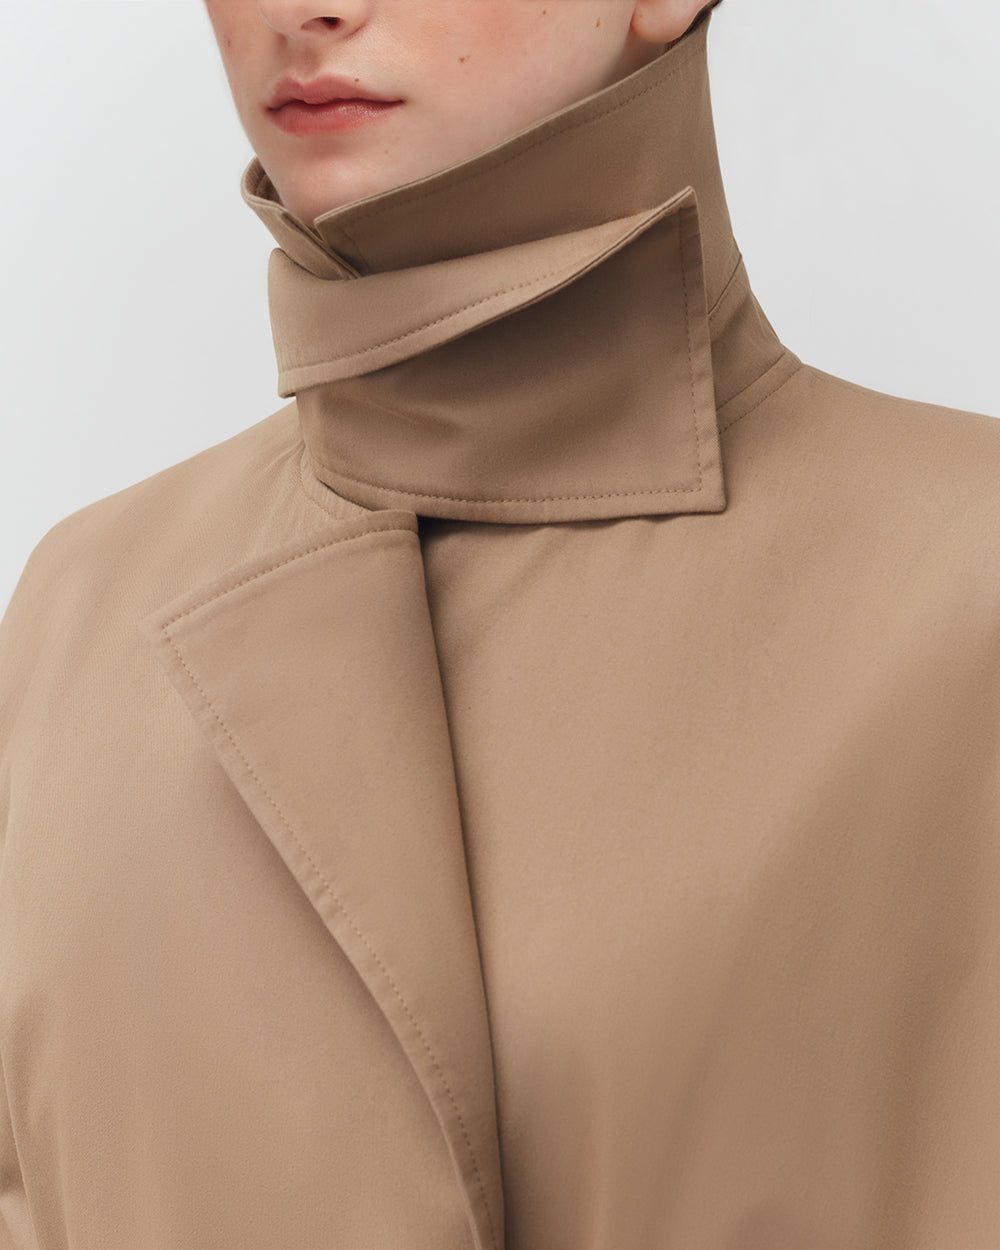 Close-up of a person wearing a high-neck jacket.